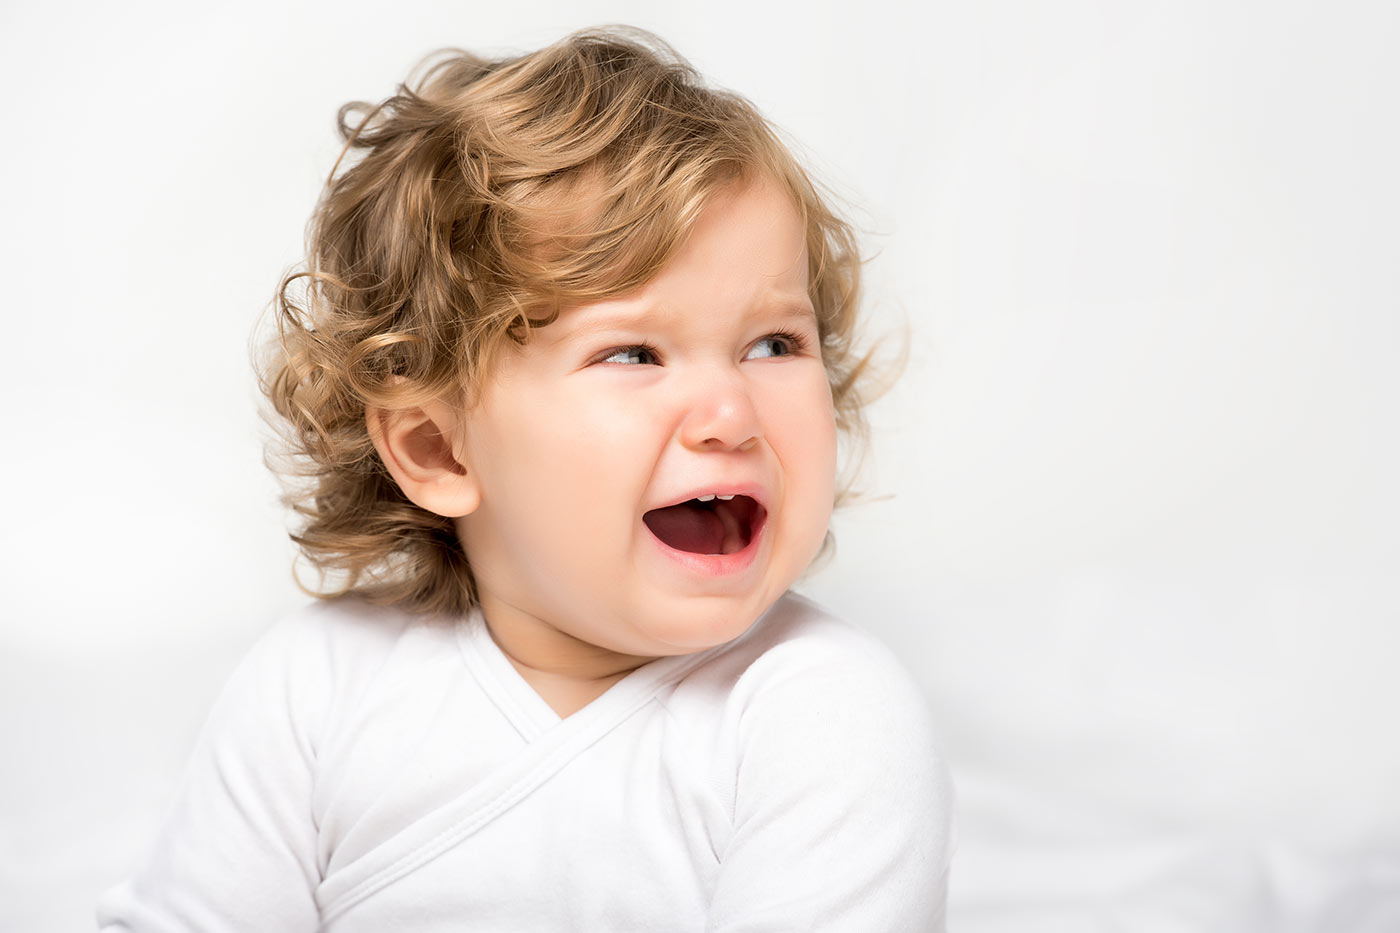 How to Stop Your 2 Year Old's Bedtime Tantrums - Sleeping Should Be Easy